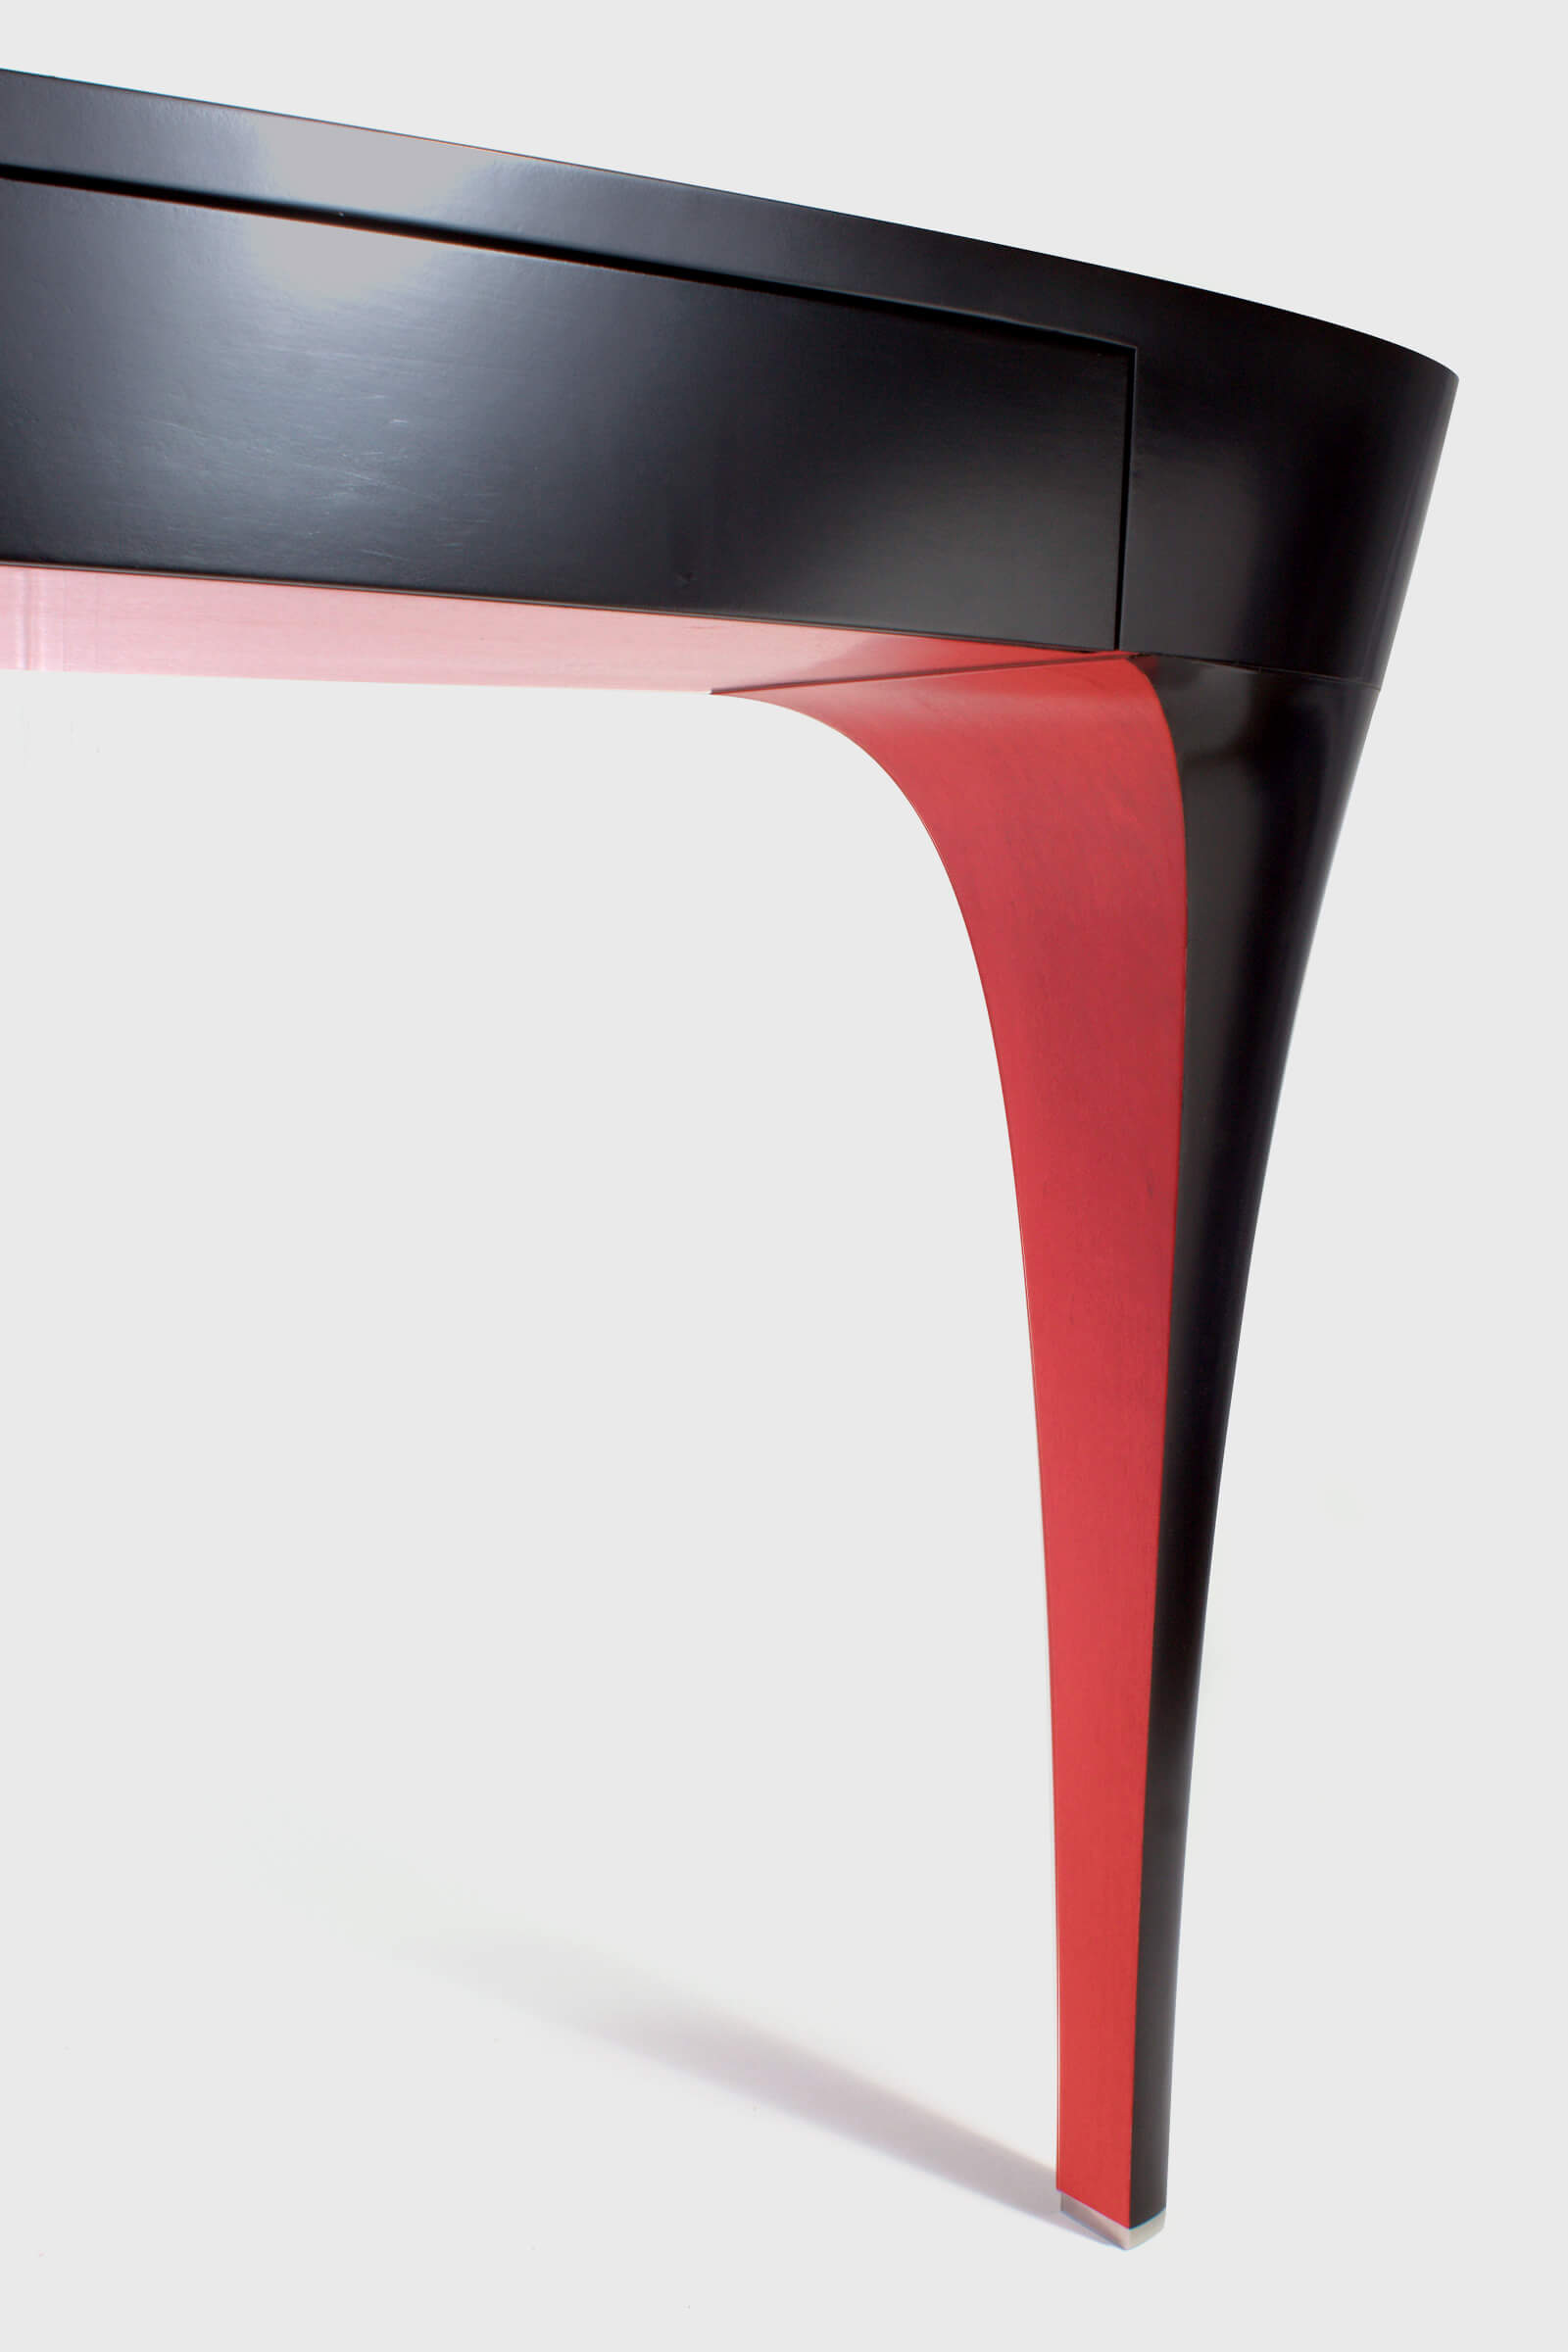 Luxurious black lacquer dressing table with red detail by Splinterworks.